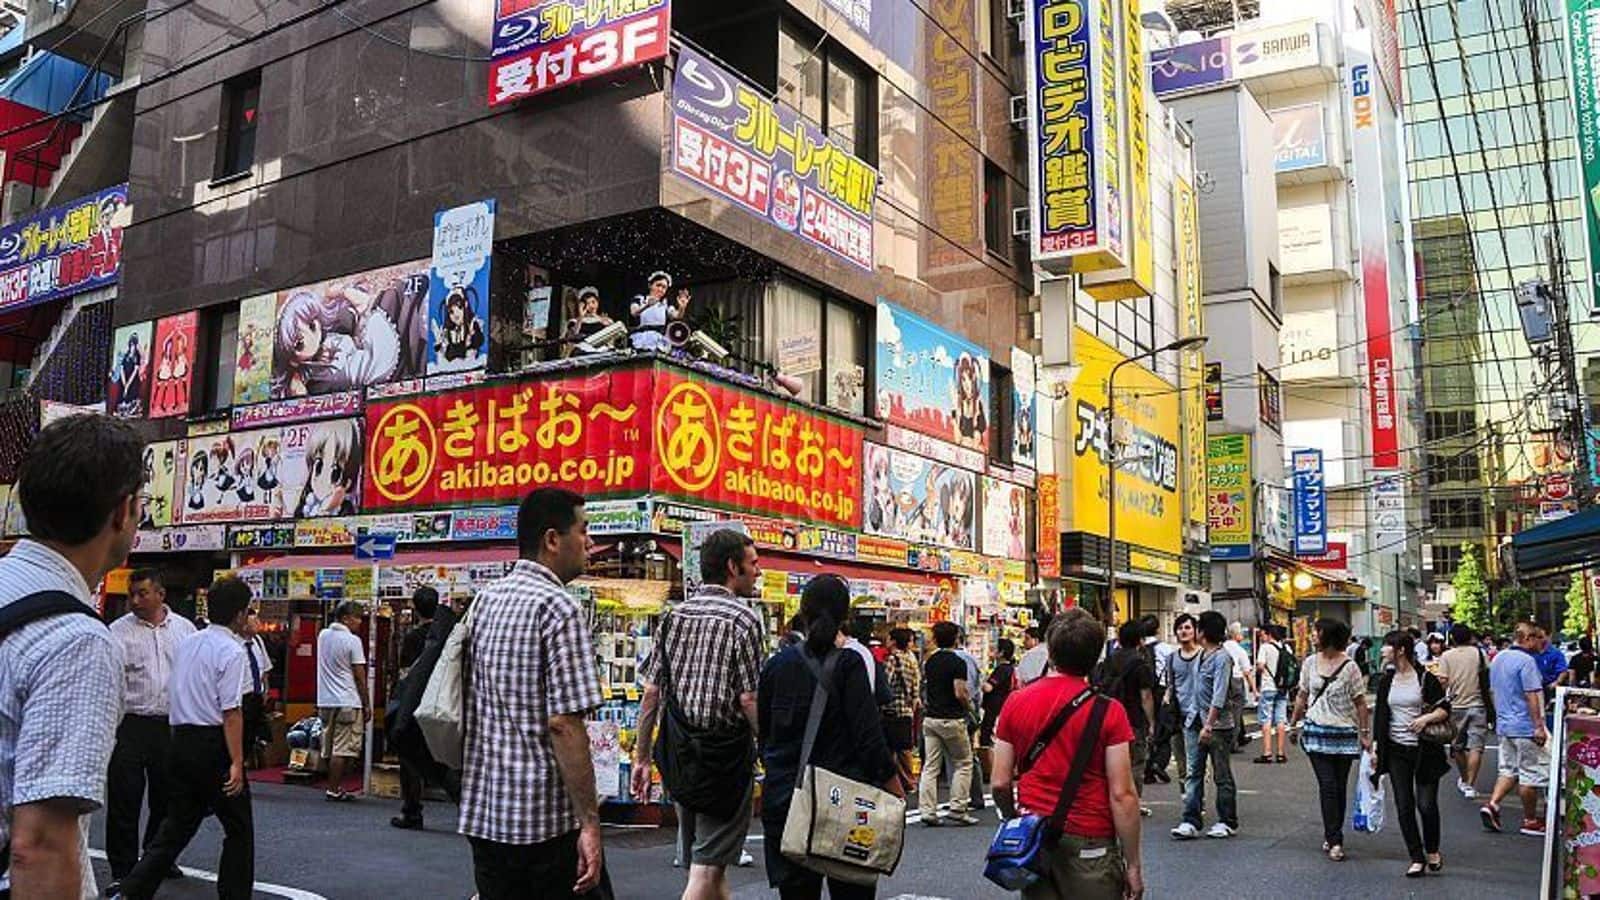 Recommendations for an ultimate tech adventure in Tokyo